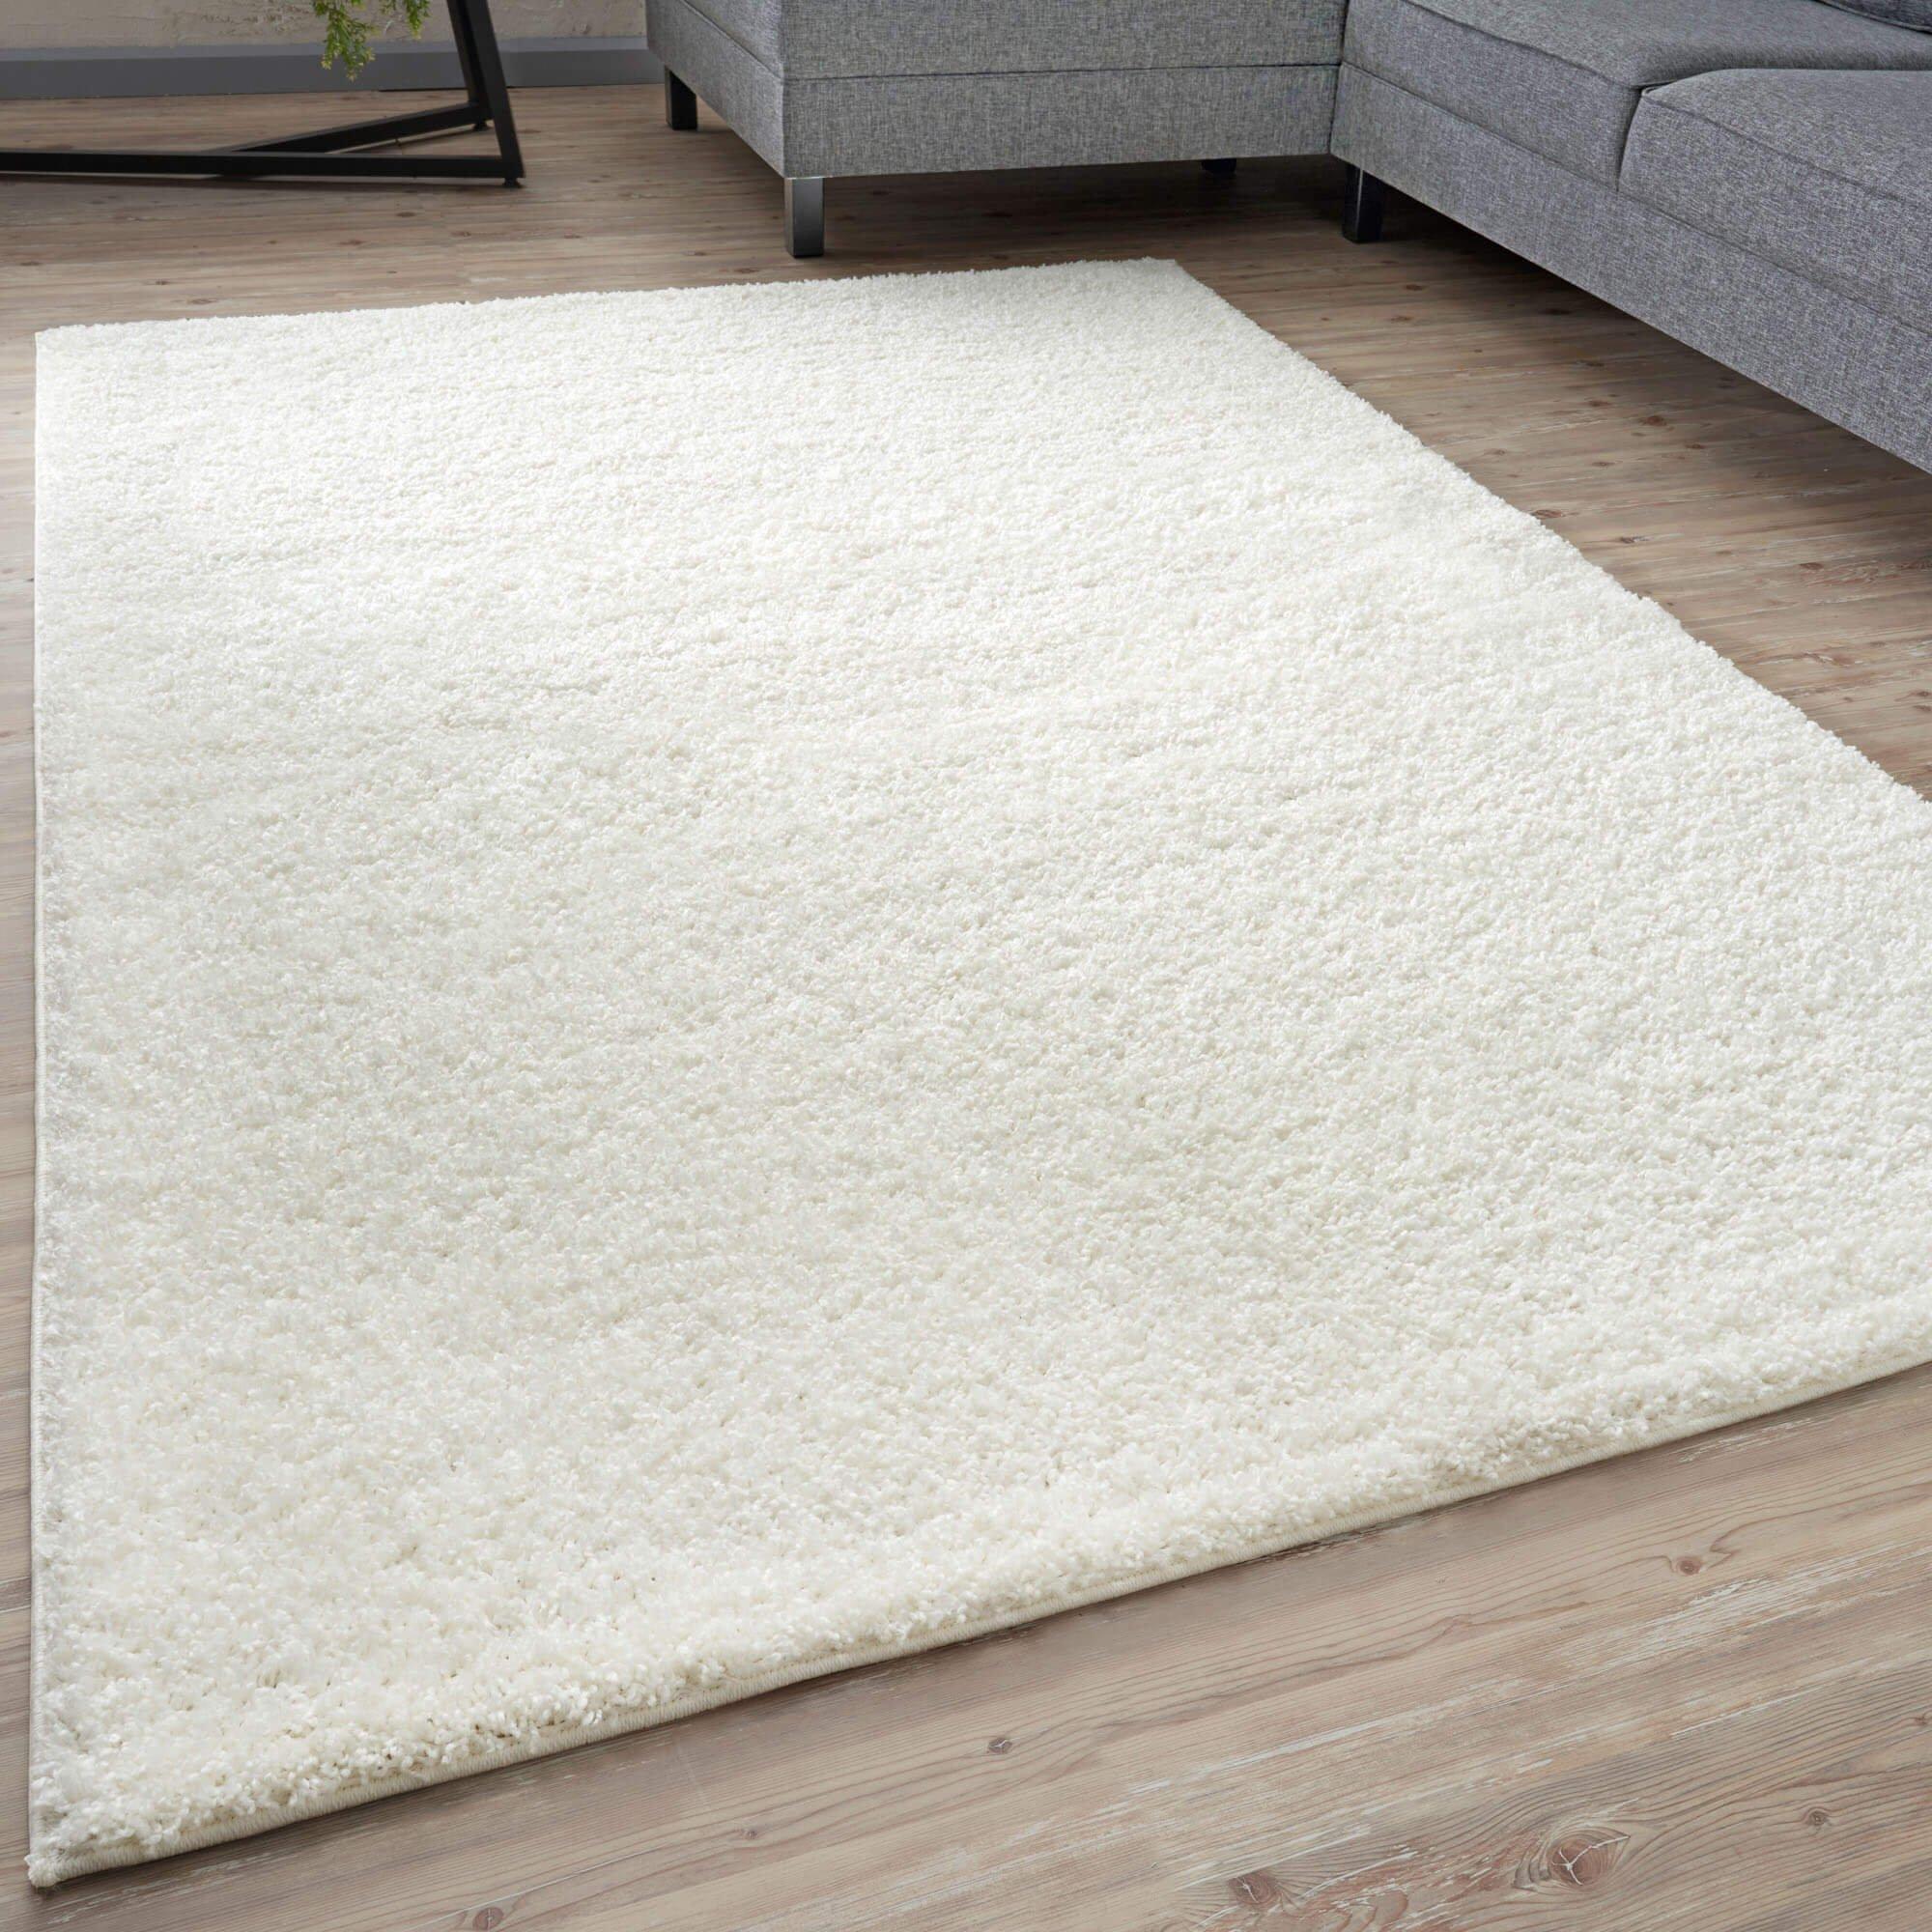 Myshaggy Collection Rugs Solid Design in White